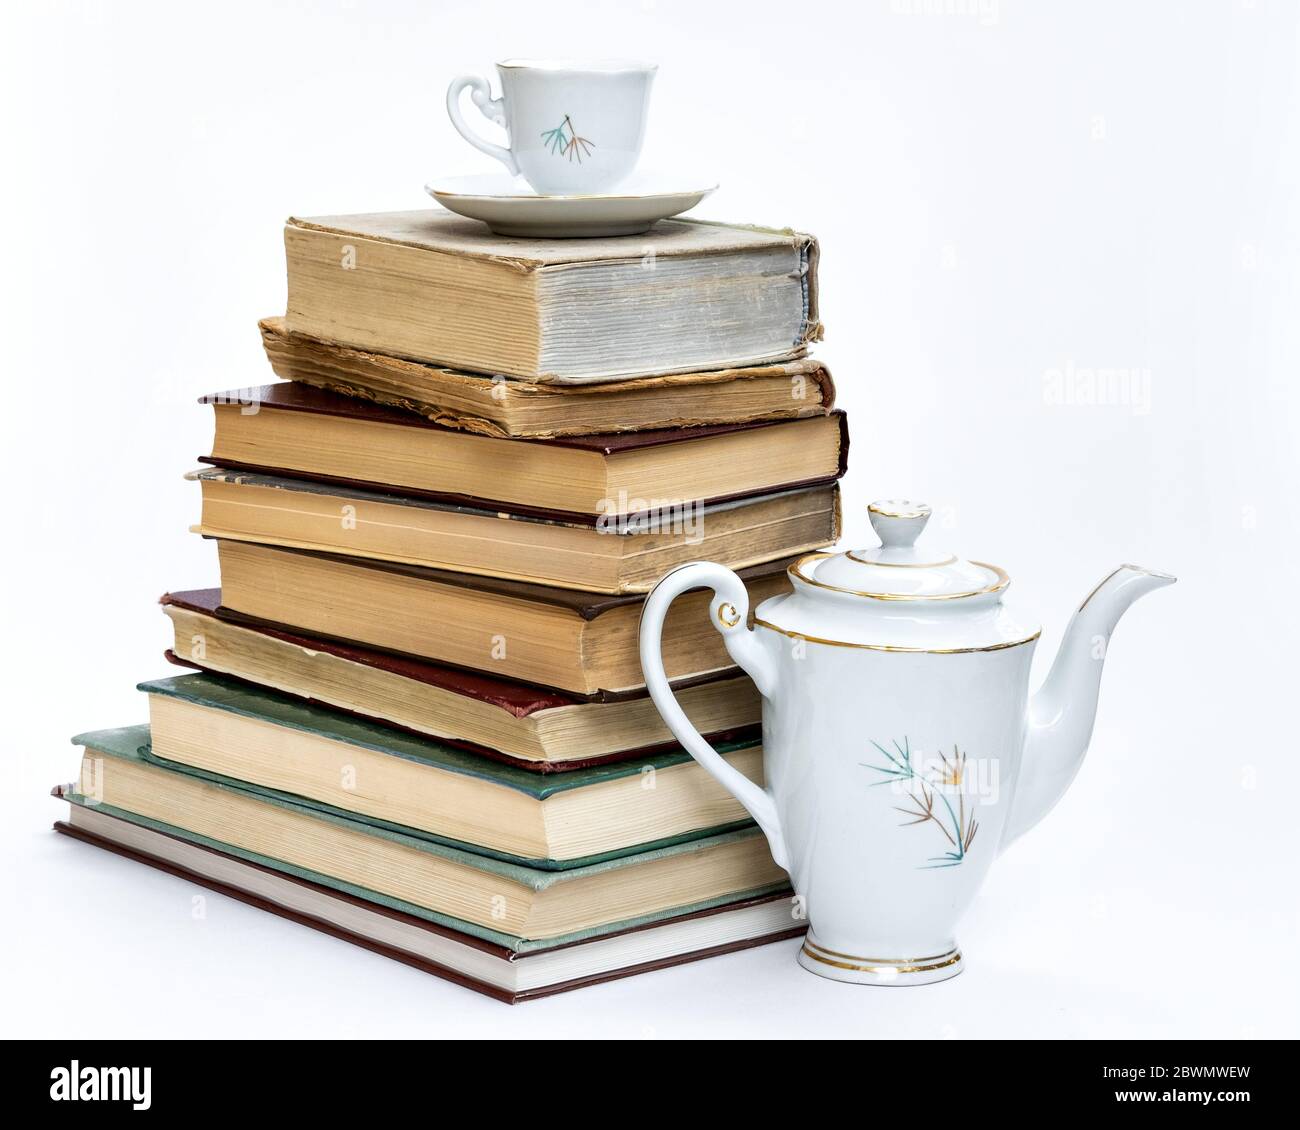 a stack of old books and an elegant coffee set. On white background. Stock Photo